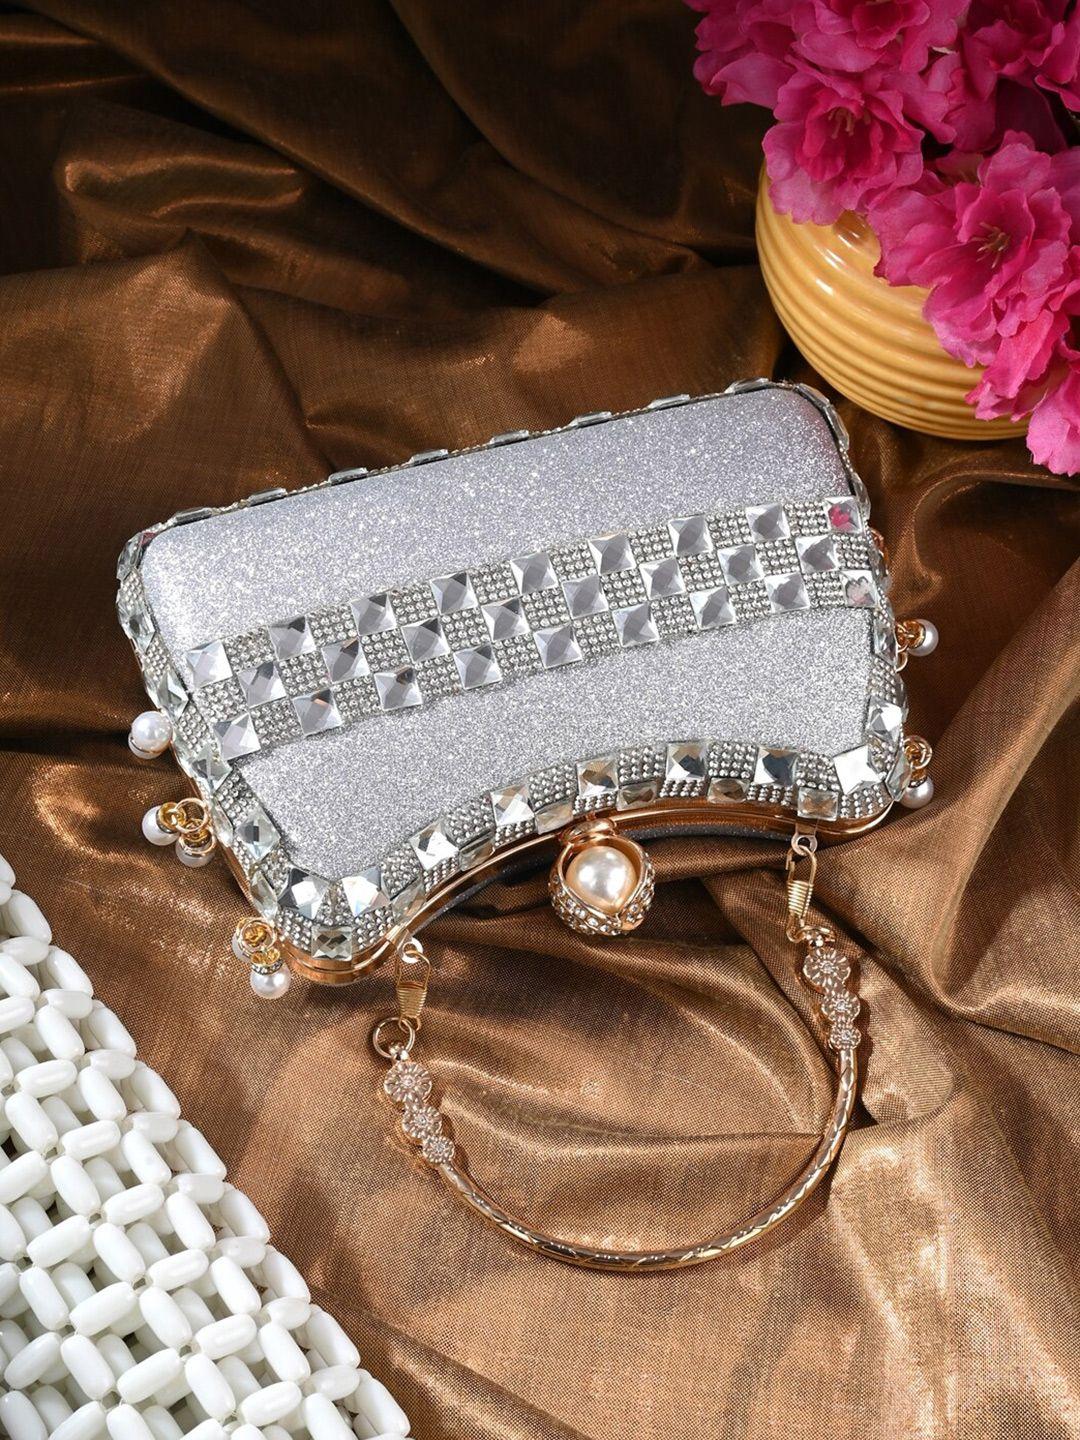 toobacraft silver-toned & white embellished box clutch